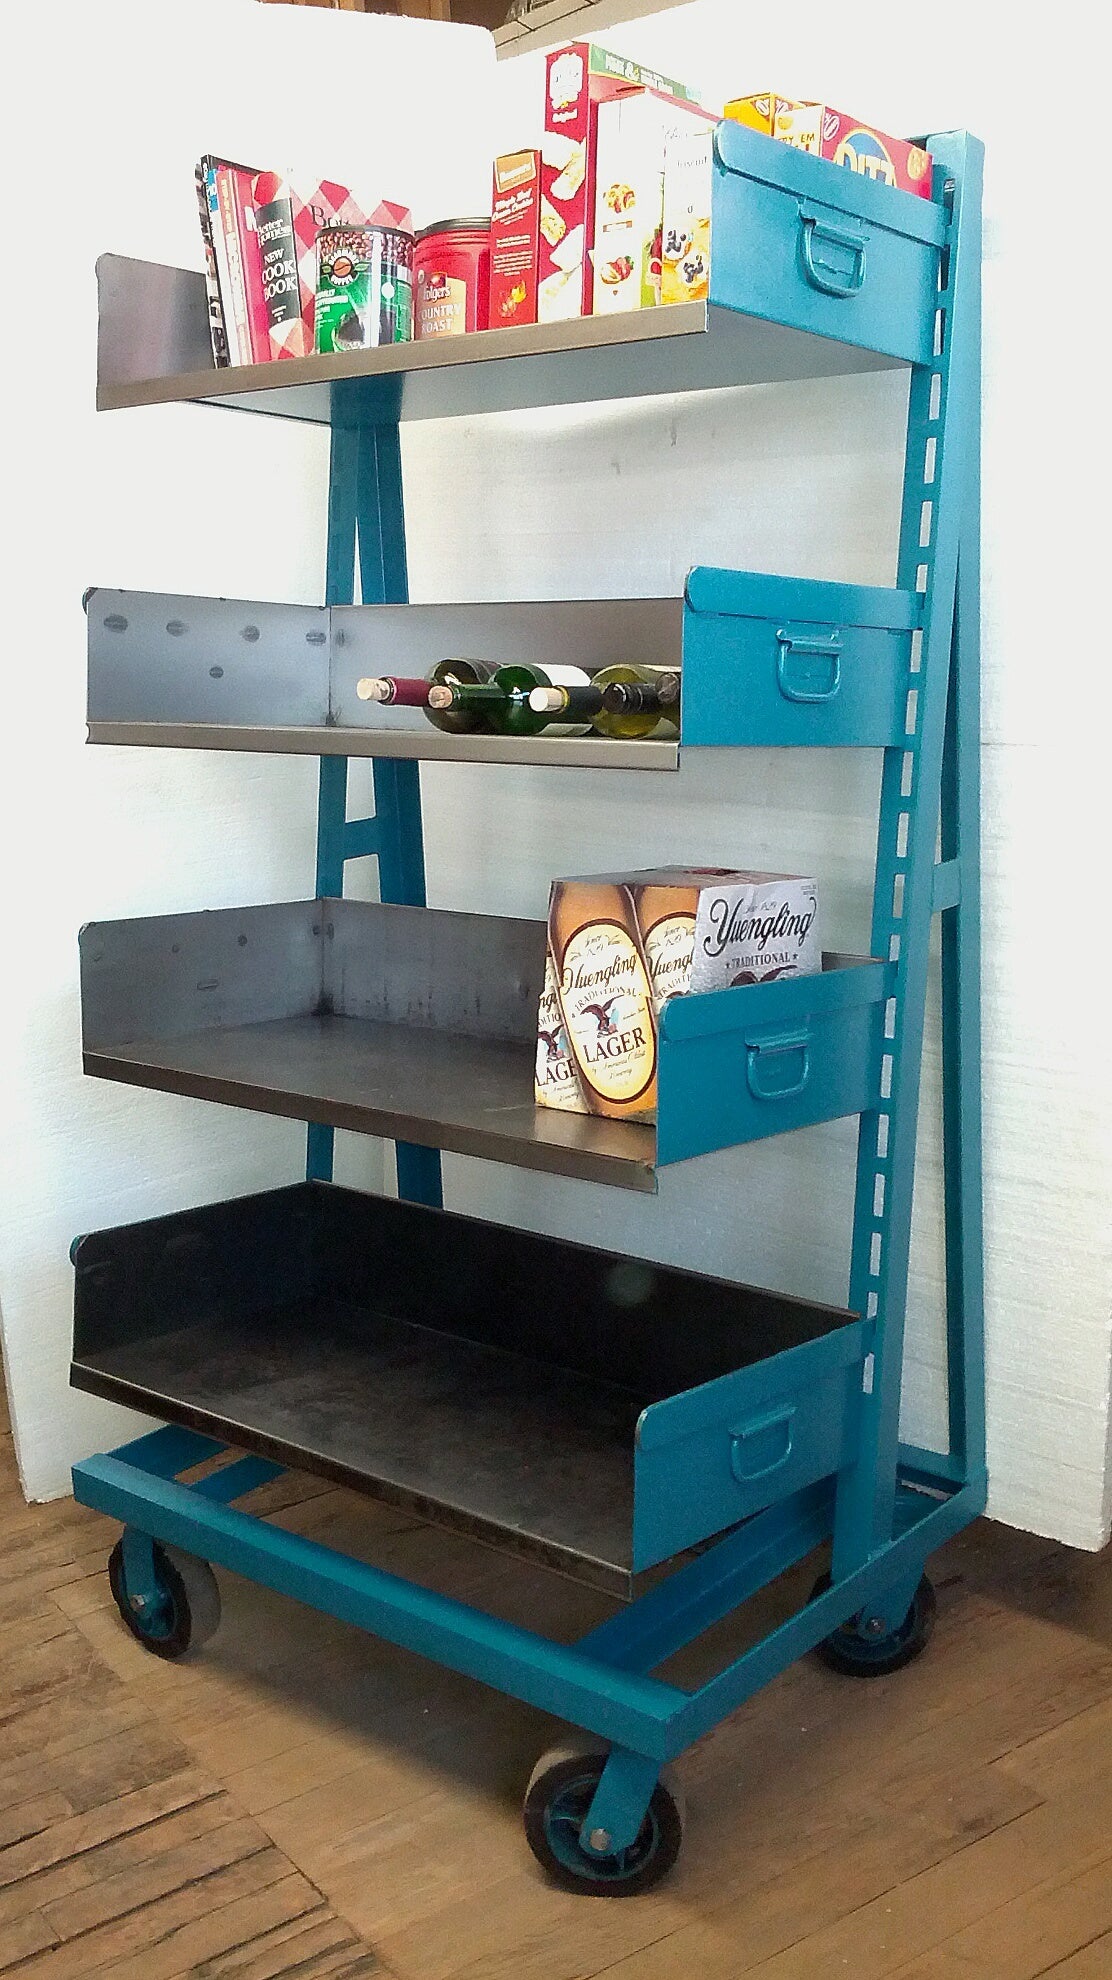 20th Century Industrial Steel Factory Storage Rack Shelving Unit, Choice of Color; Two avail For Sale